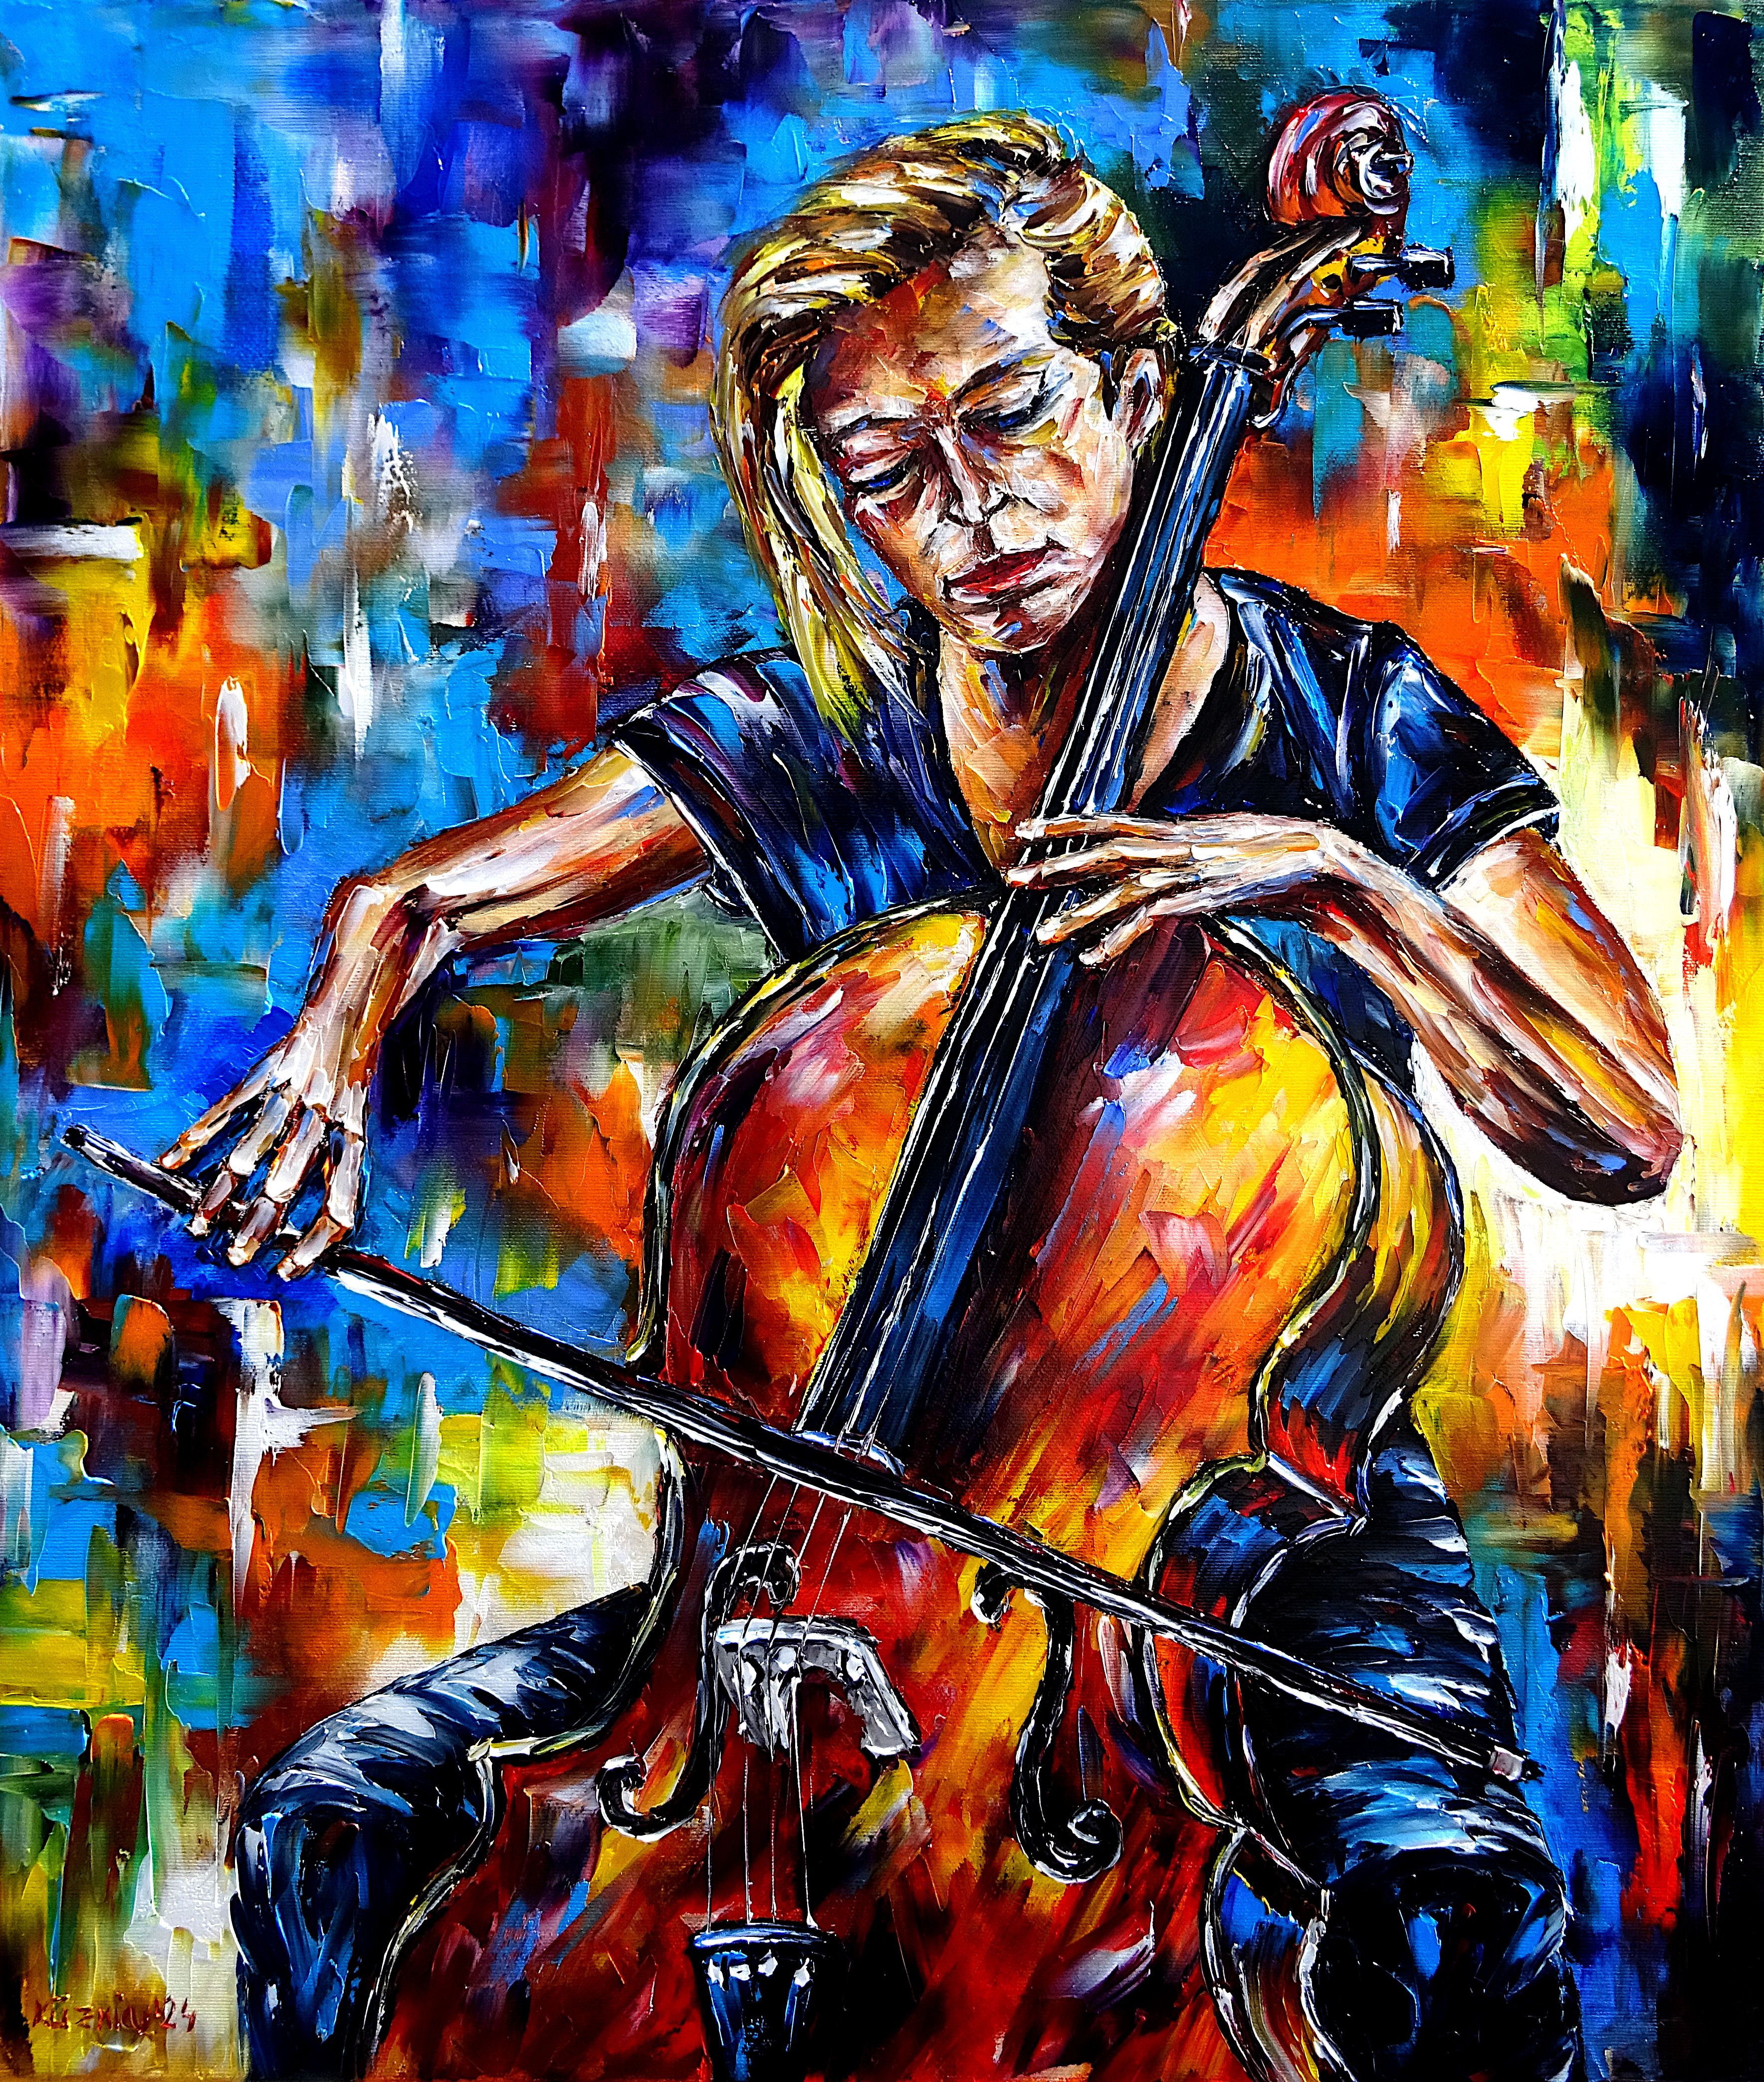 cello,cello player,female cello player,playing the cello,woman on the cello,woman playing the cello,she plays the cello,girl on the cello,girl playing the cello,music,musician,female musician,cello love,cello lover,classical music,classical,making music,playing music,immersed in music,music feel,feeling music,closed eyes,musical instrument,woman with cello,girl with cello,I love cello,palette knife oil painting,expressive art,expressive painting,expressionism,lively colors,colorful painting,impasto painting,figurative